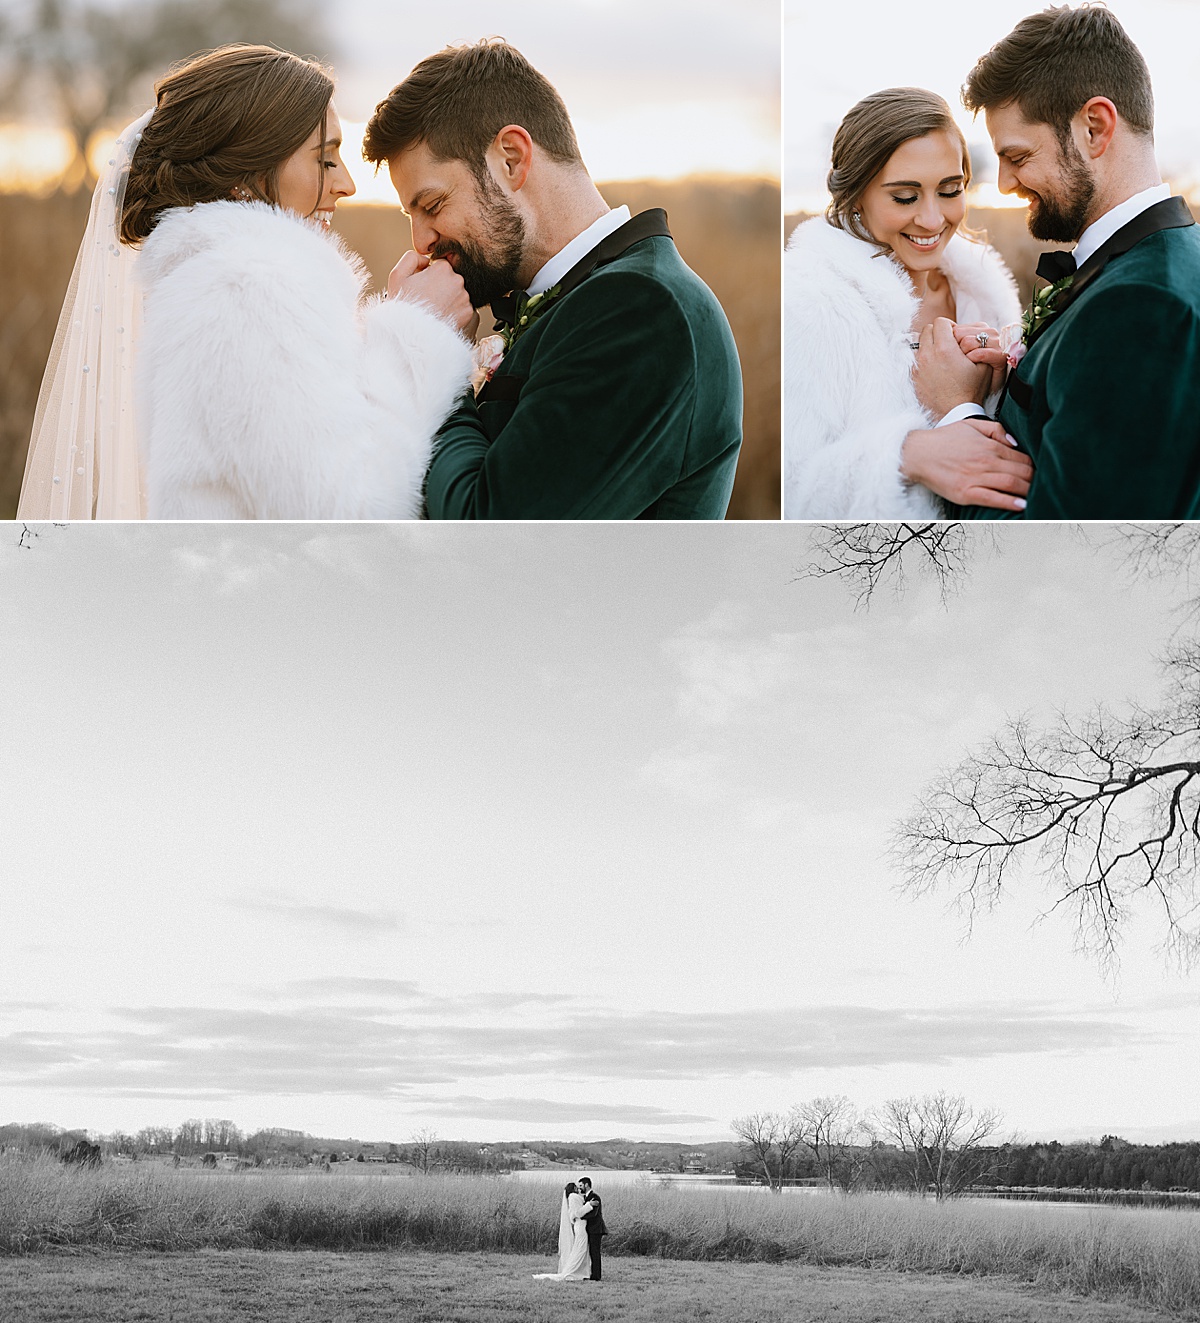 Winter bride and groom wedding day portraits.